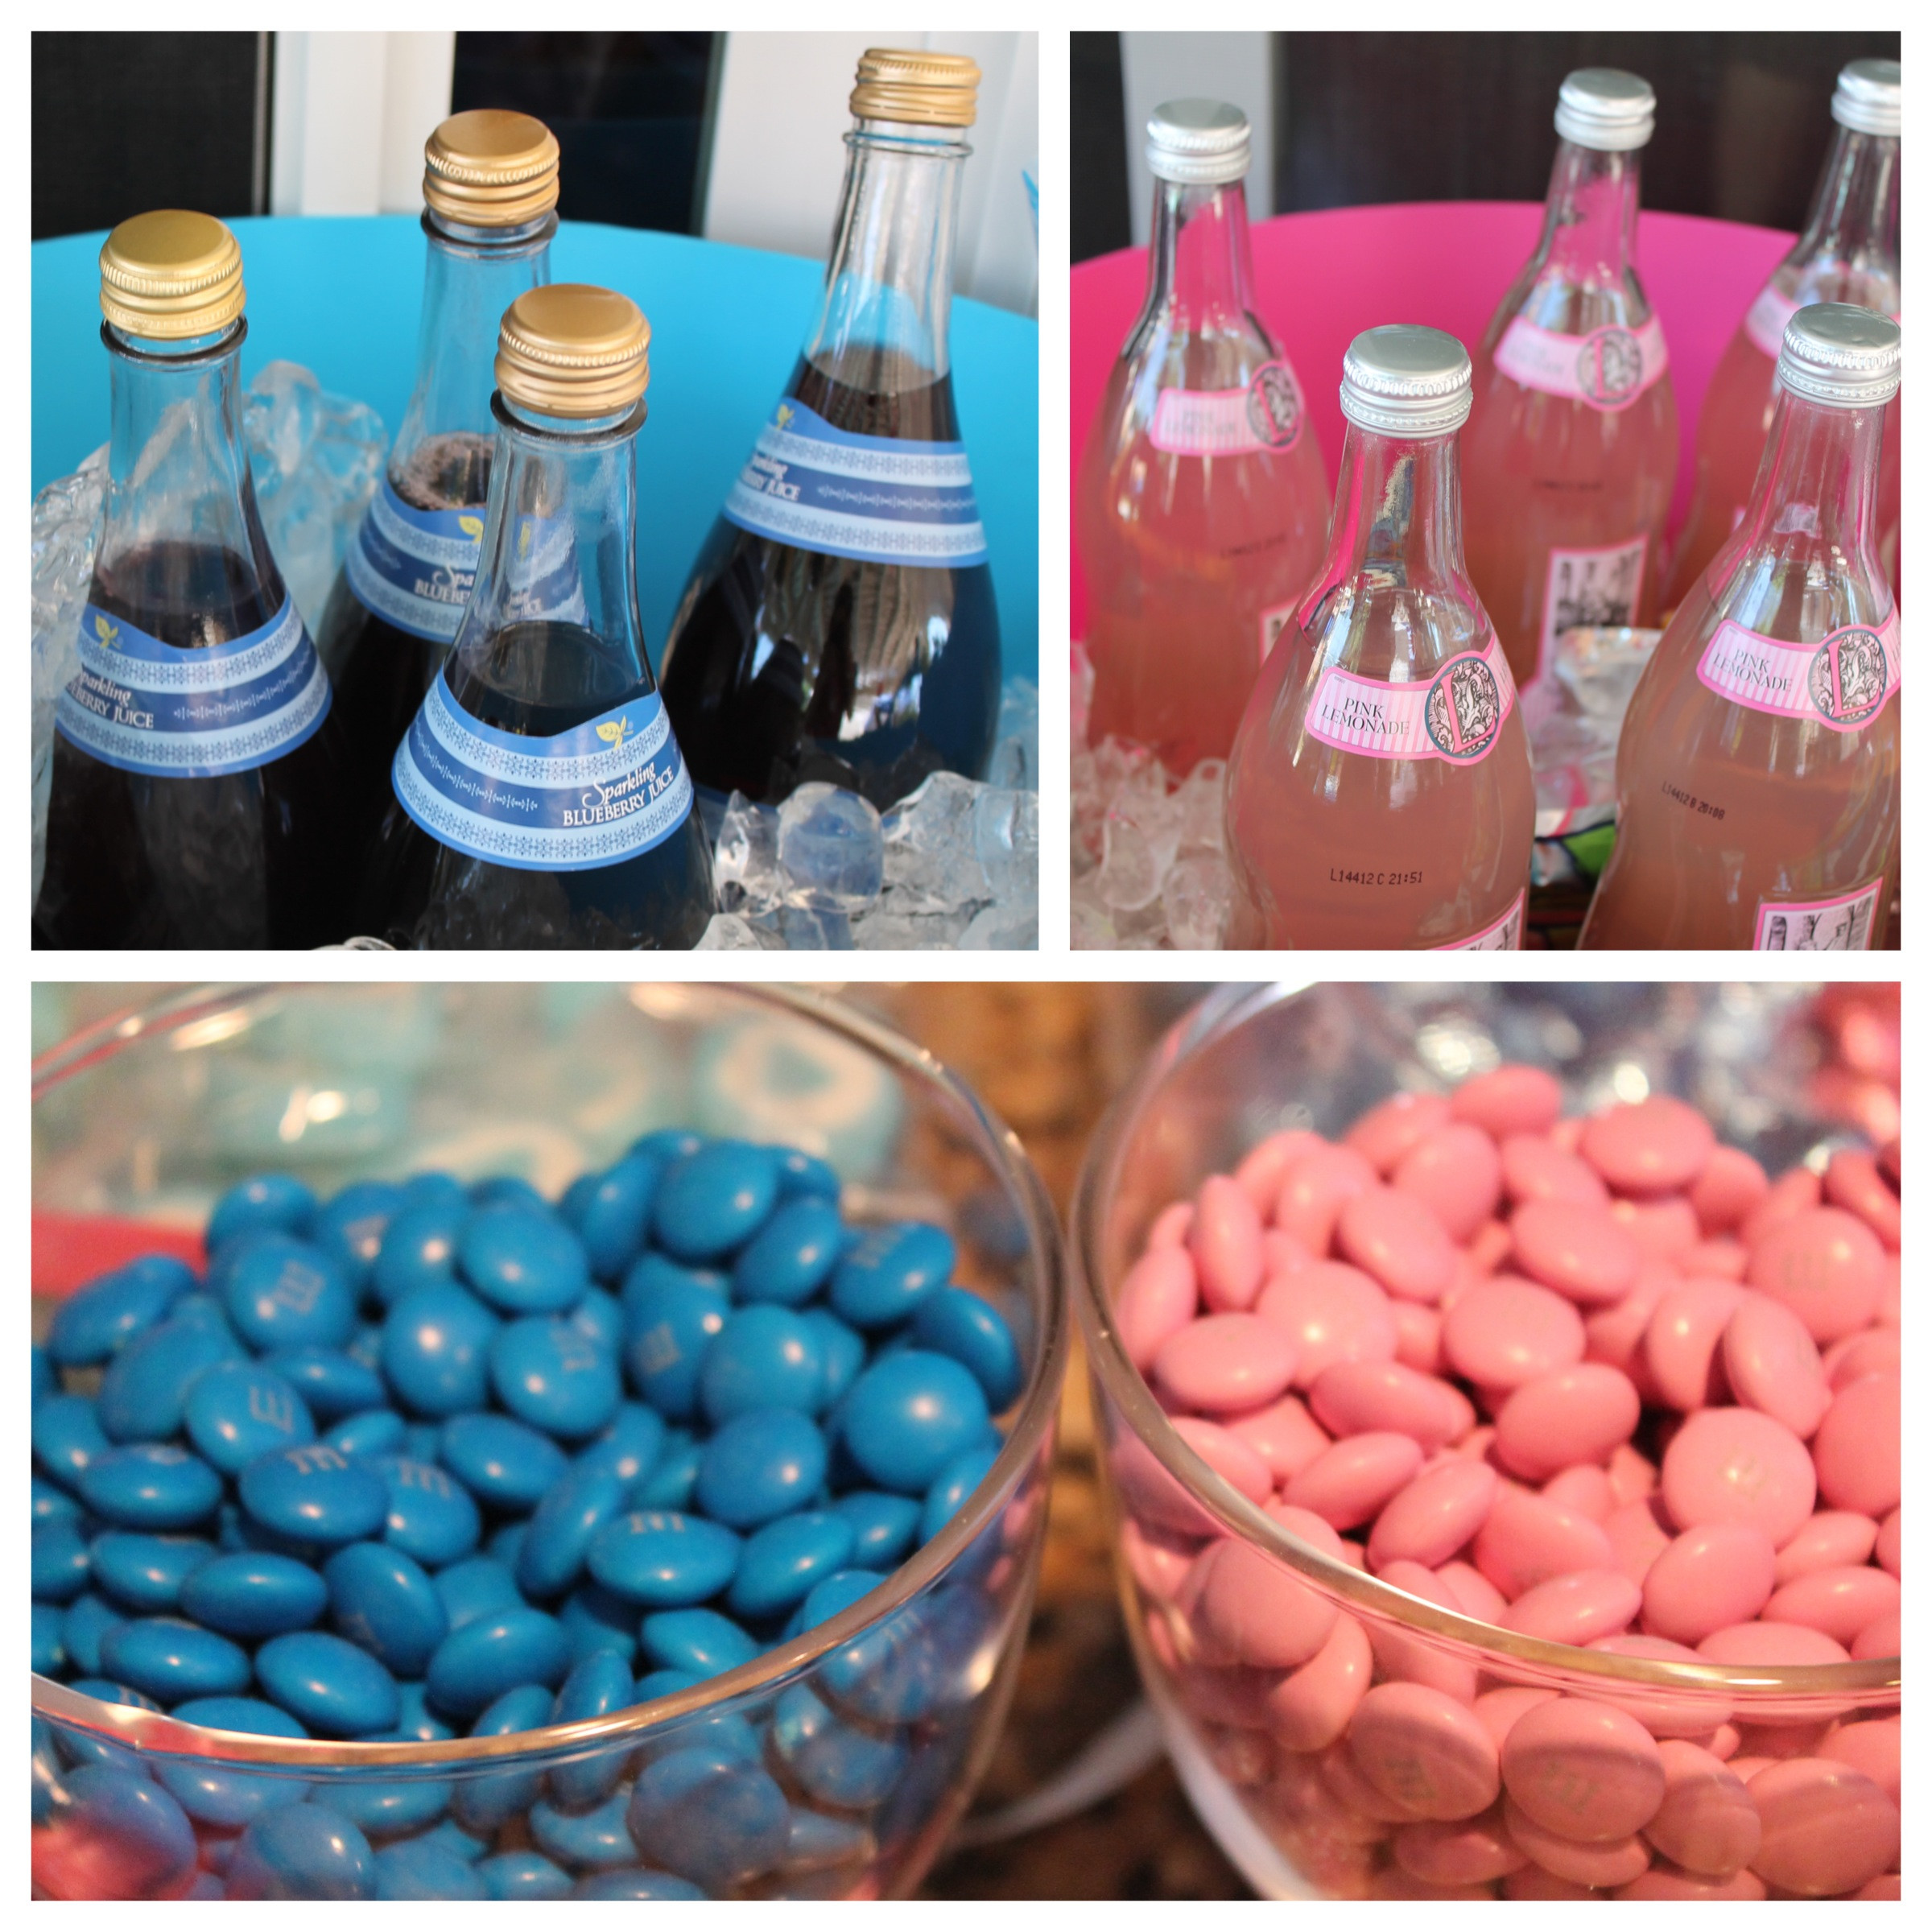 Good Ideas For Gender Reveal Party
 It s a Gender Reveal Party Ideas